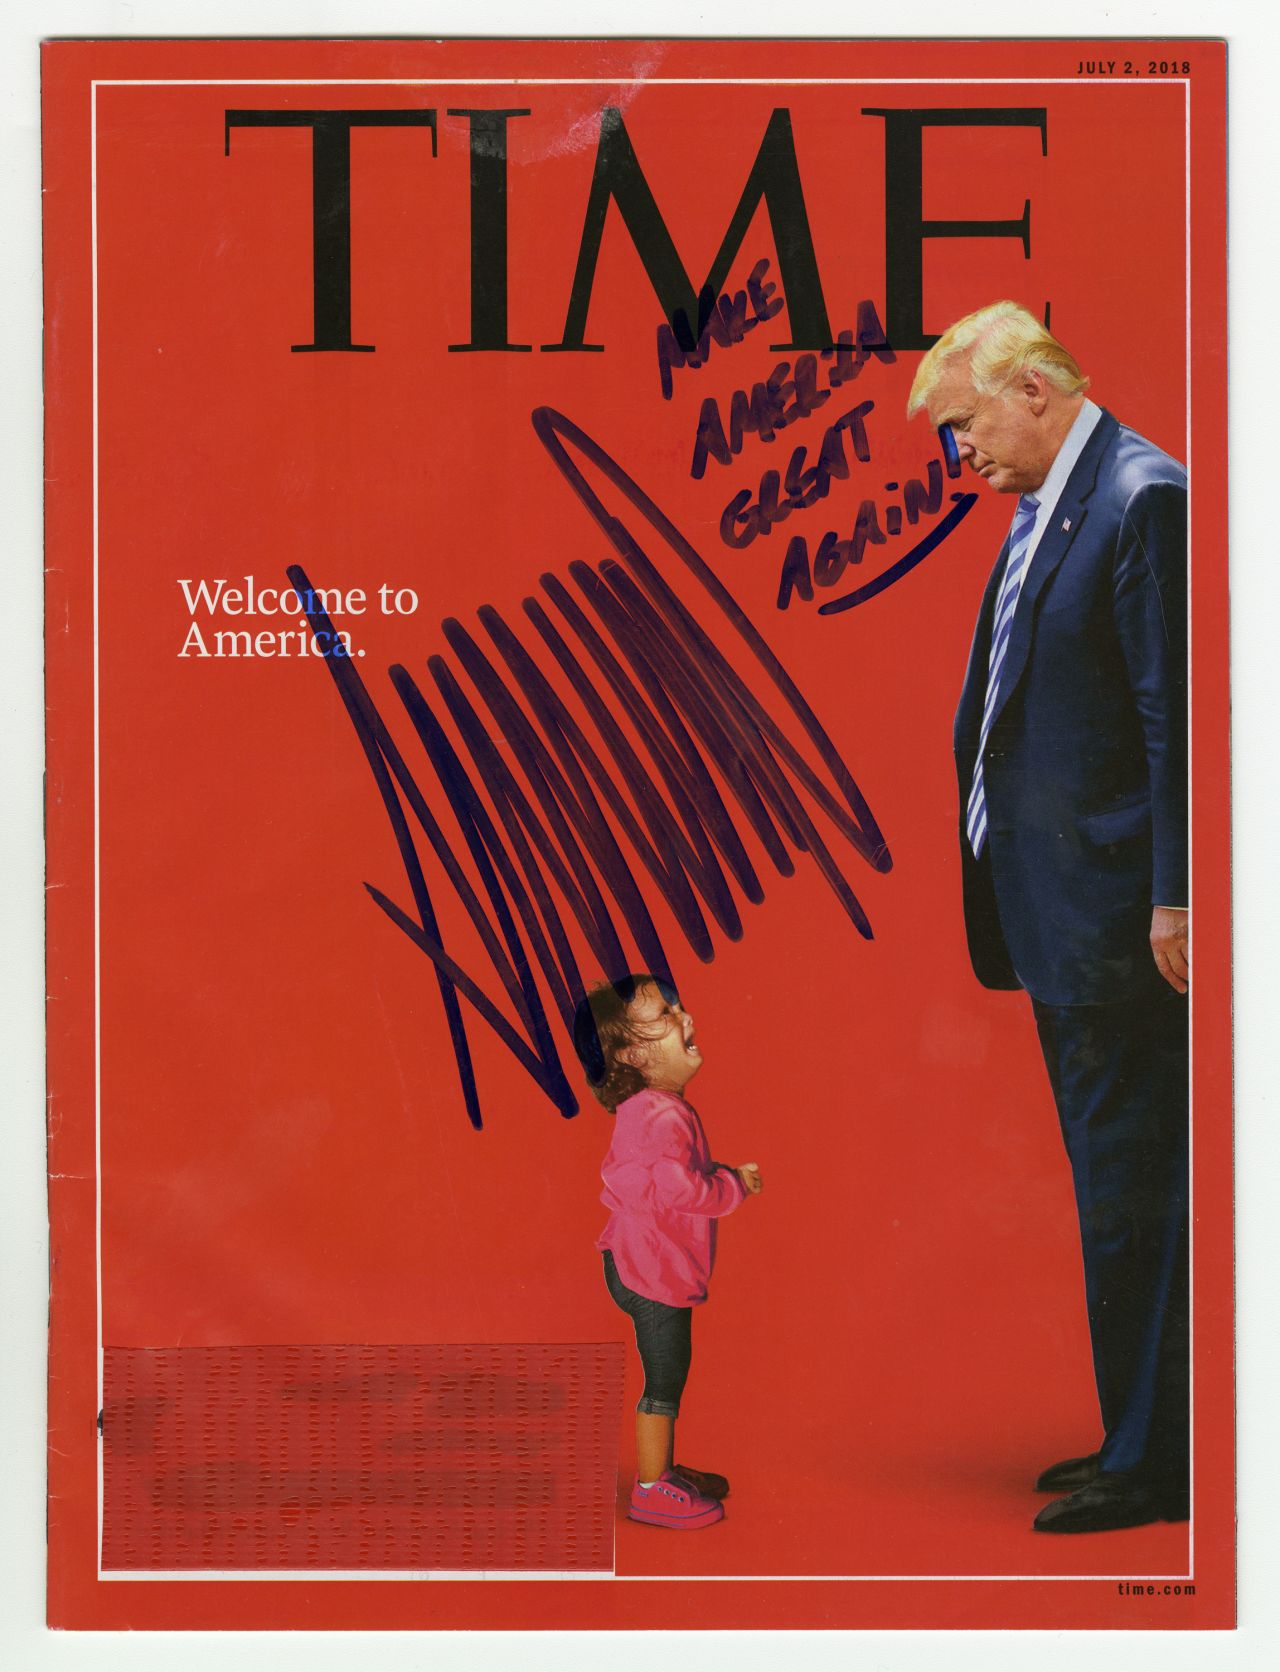 Magazines are featured including high-profile autographed covers that were critical of Trump.